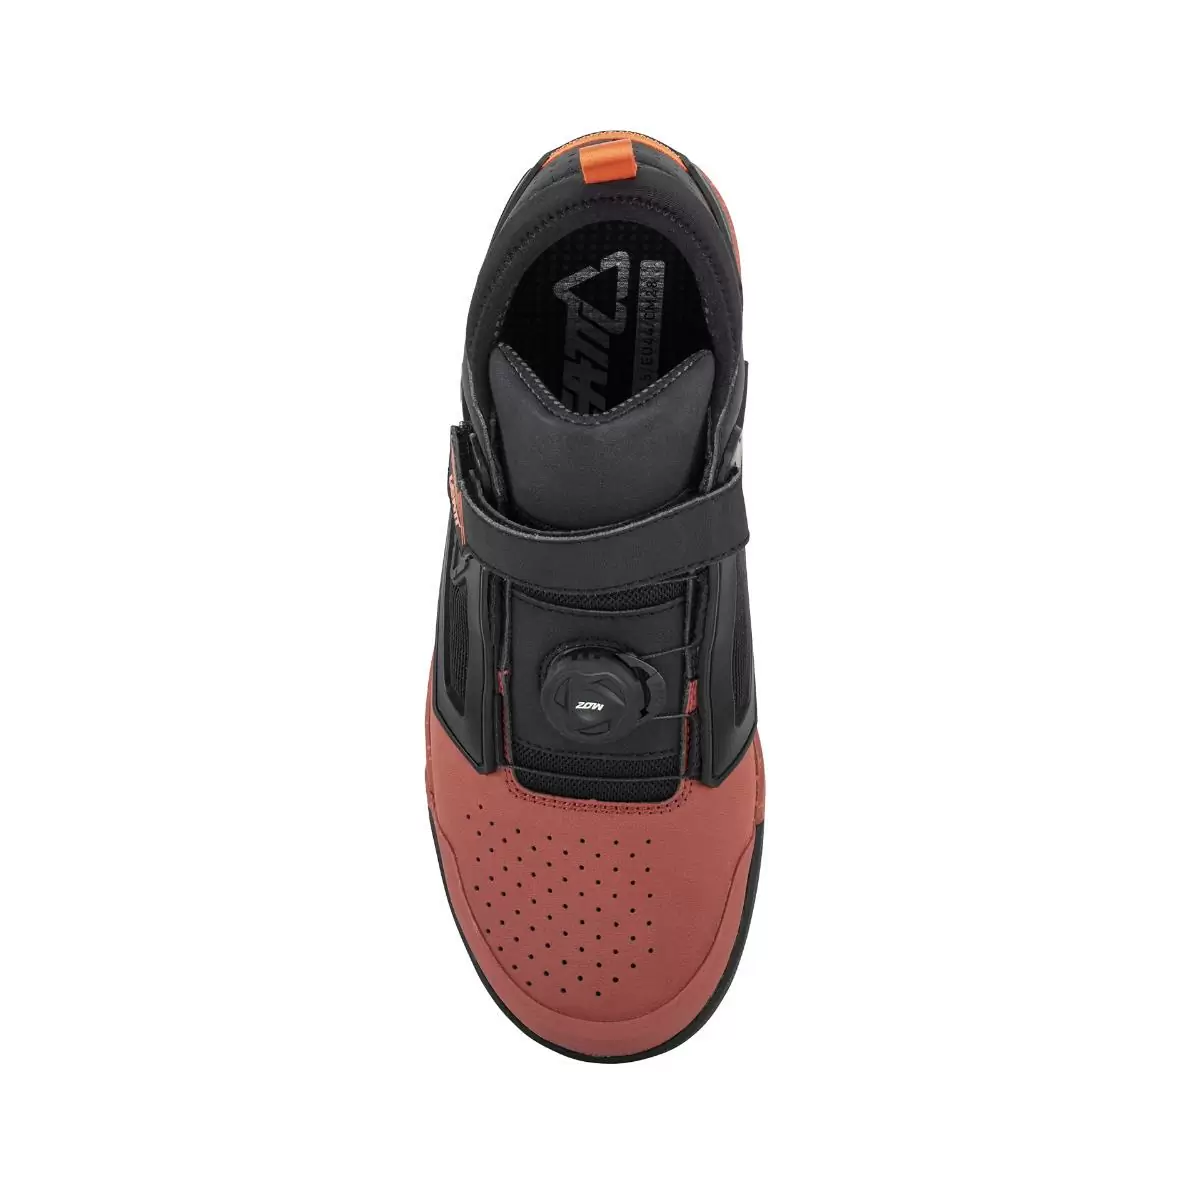 Chaussures VTT 3.0 Flat Pro Rouge Taille 43 #4